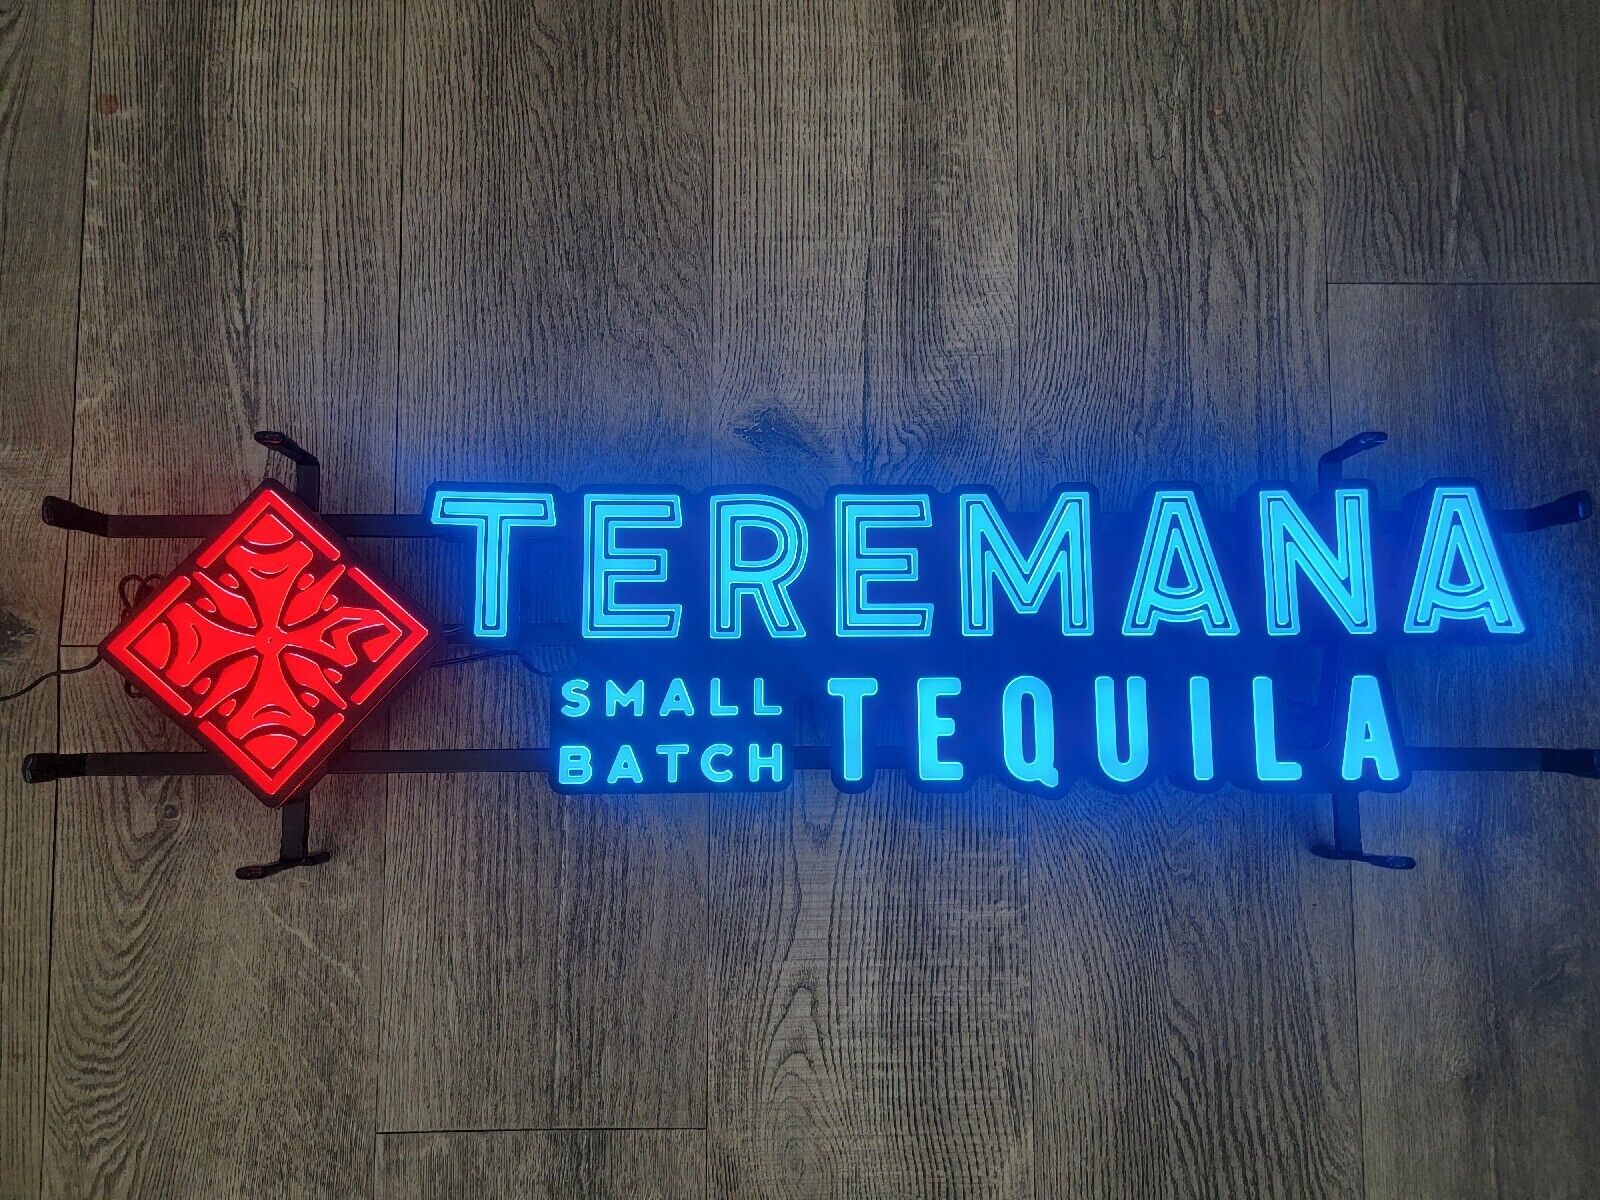 TEREMANA TEQUILA LED SIGN SMALL BATCH TEQUILA LIGHT SIGN MAN CAVE GARAGE 